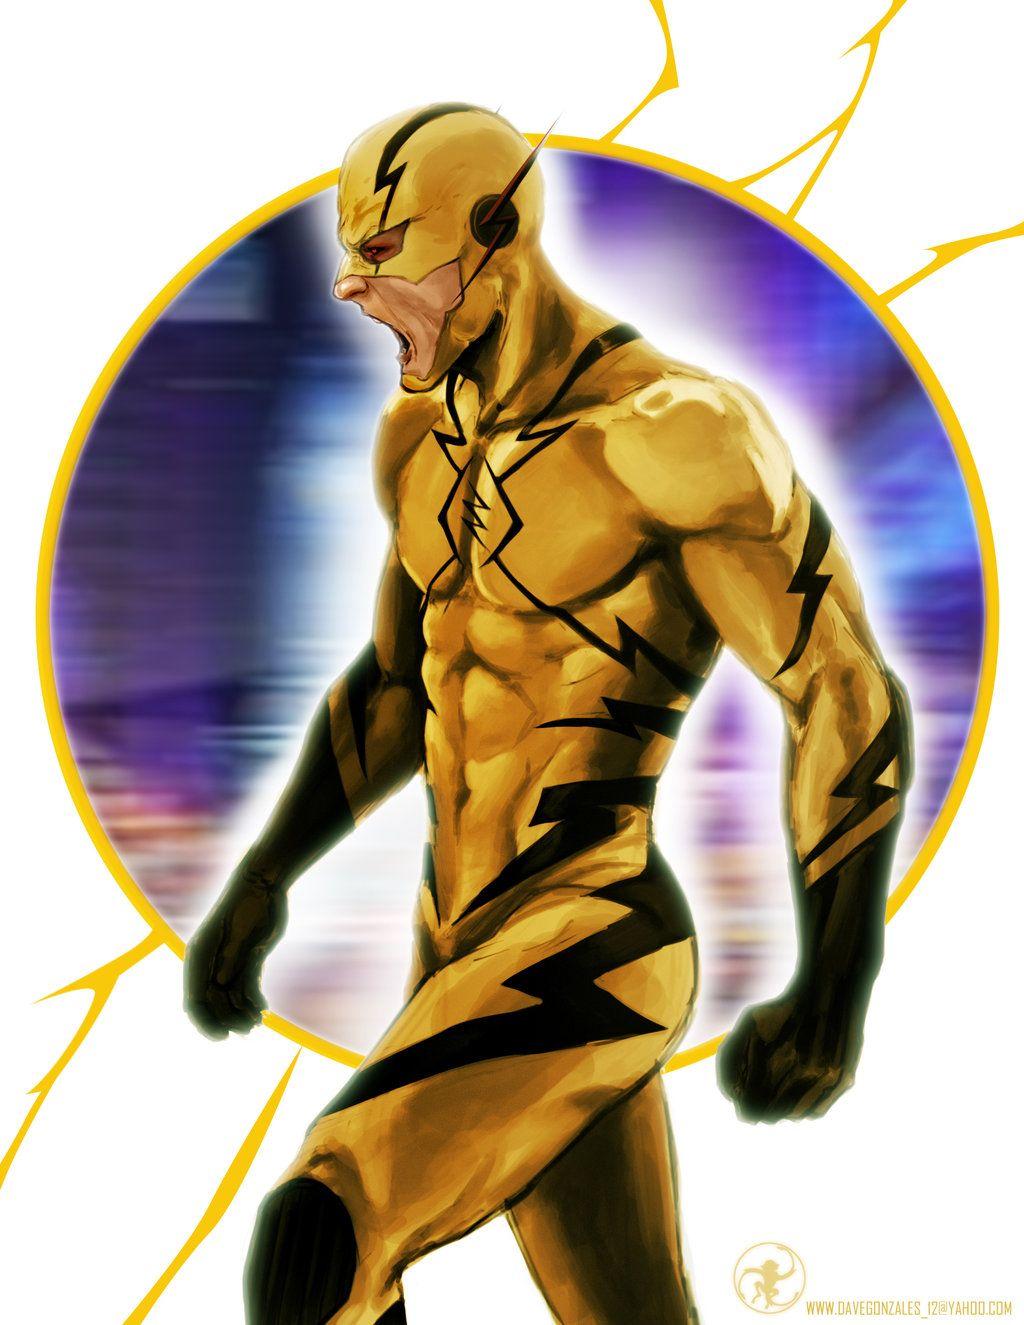 Professor Zoom screenshots, image and picture